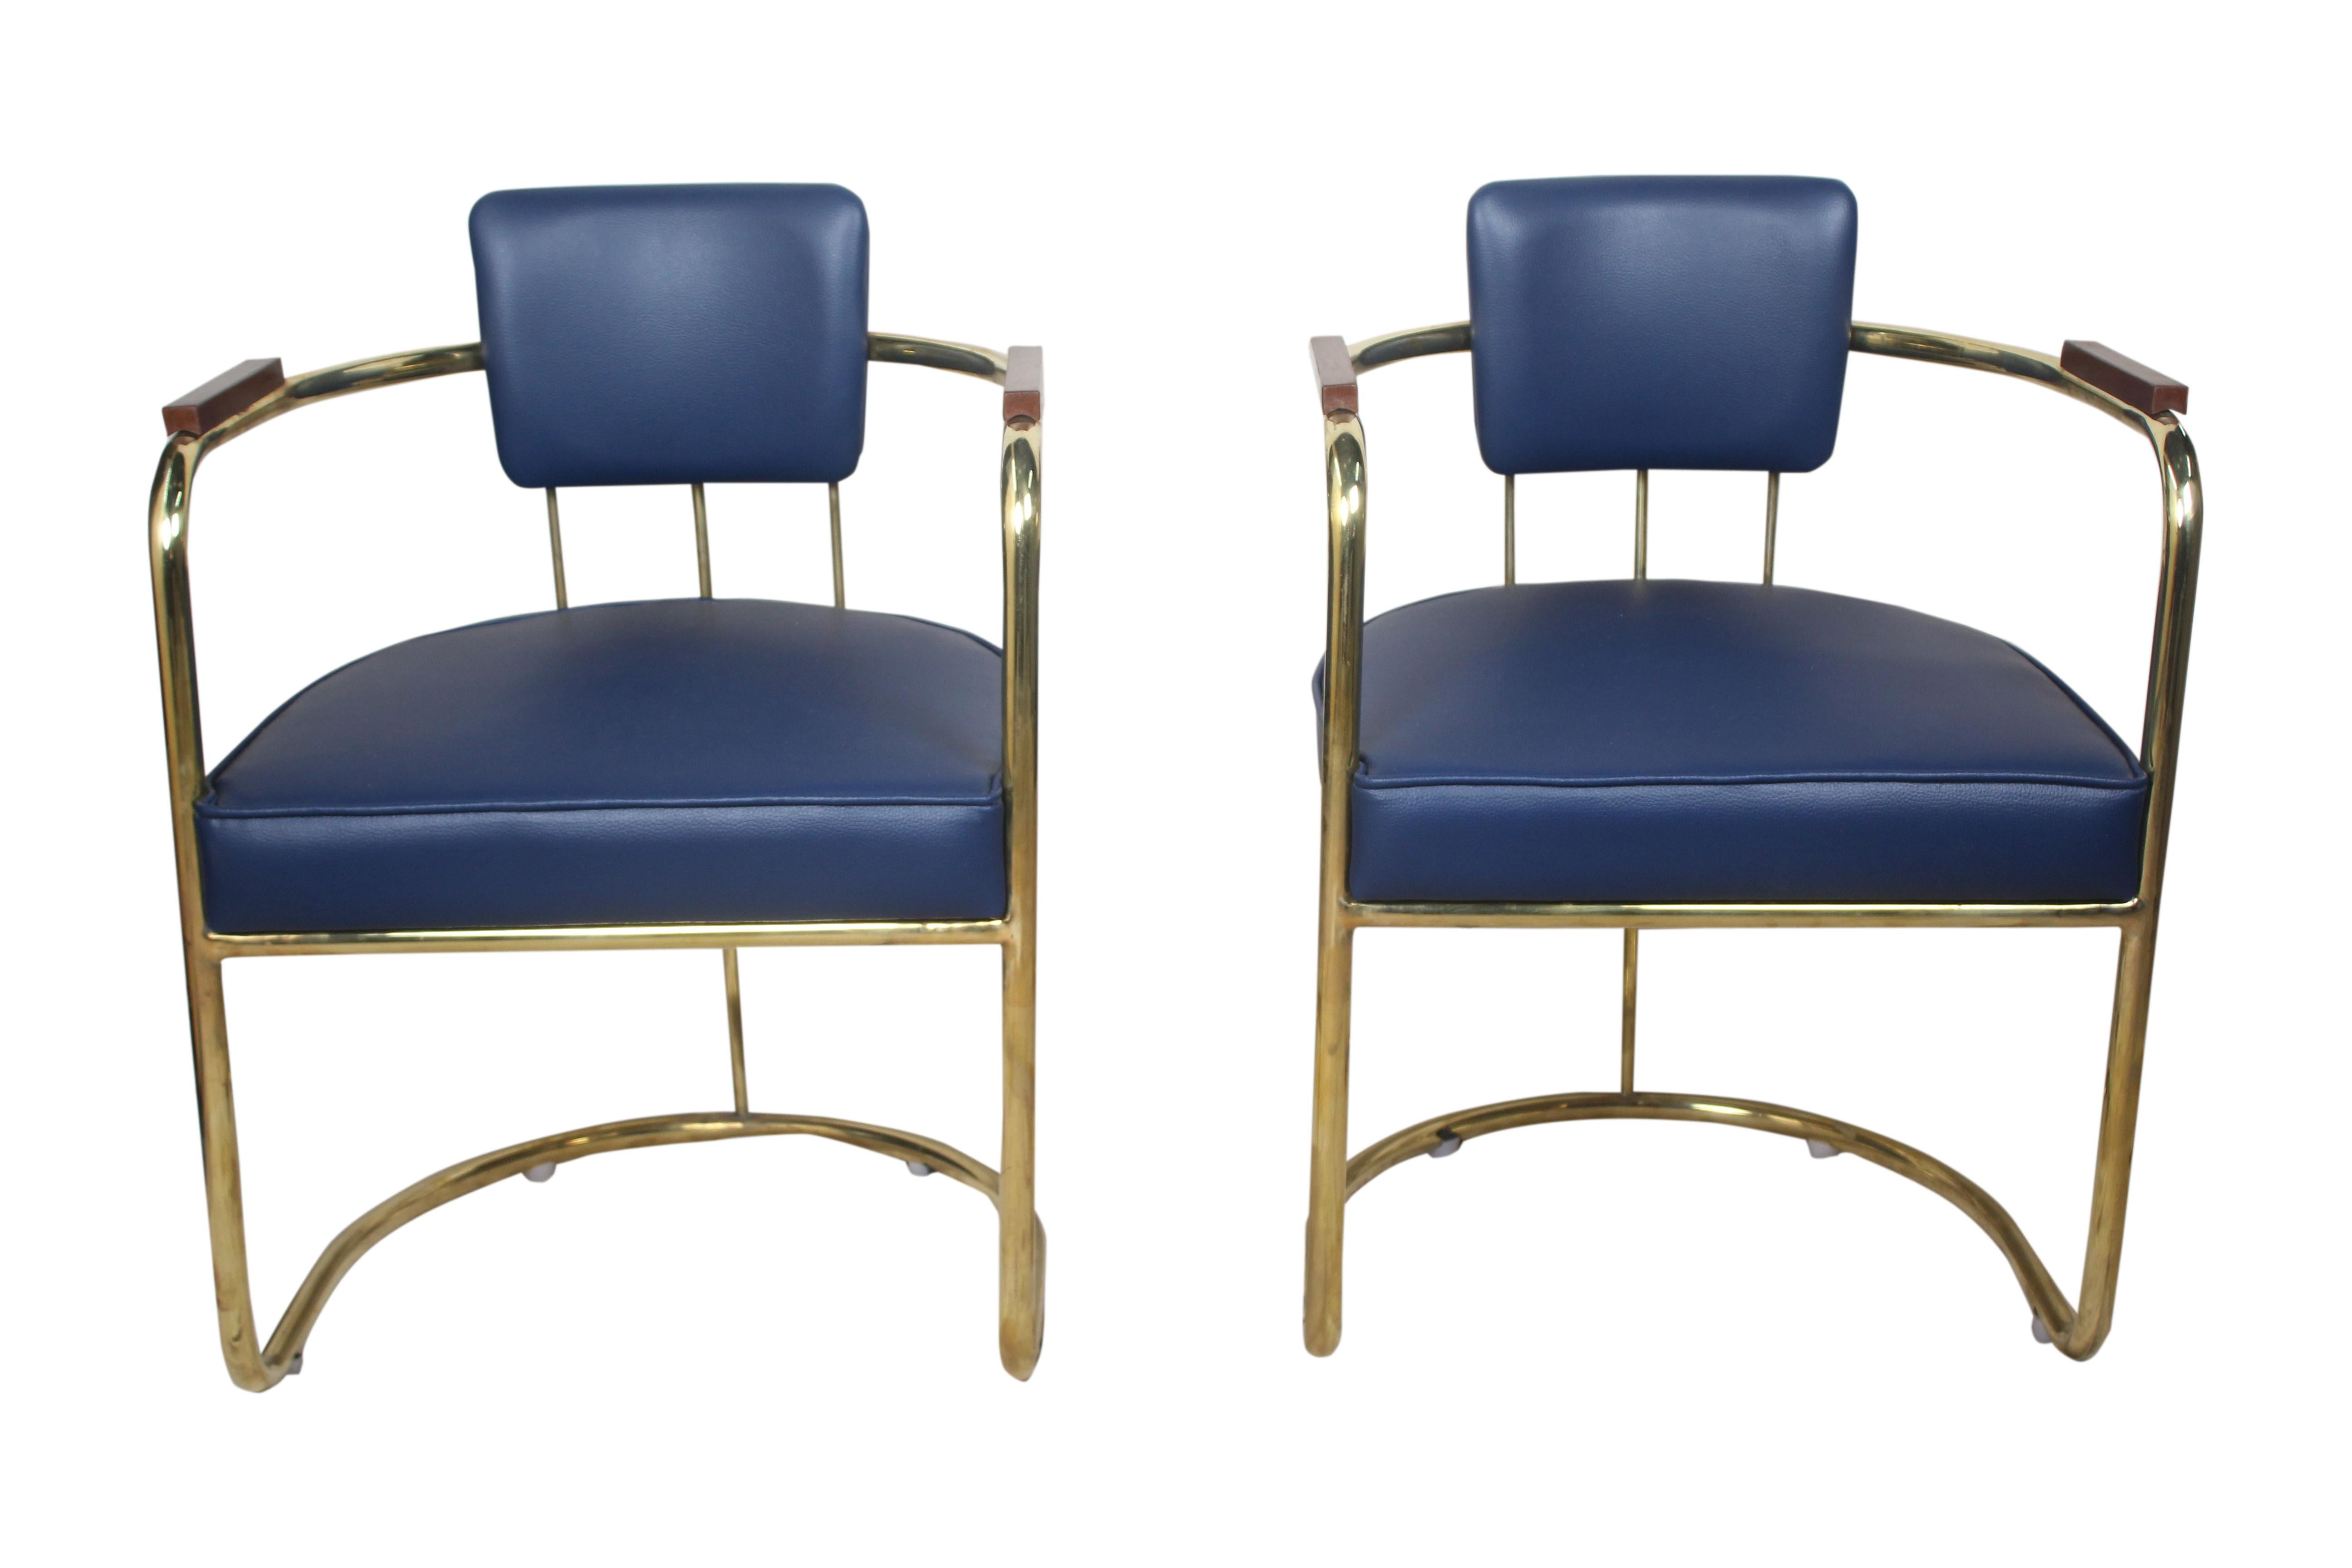 Pair of brass captain's chairs with teak armrests. Priced as a pair. Reupholstered navy blue cushions, late 1900s. From the salon of a cruising ship.